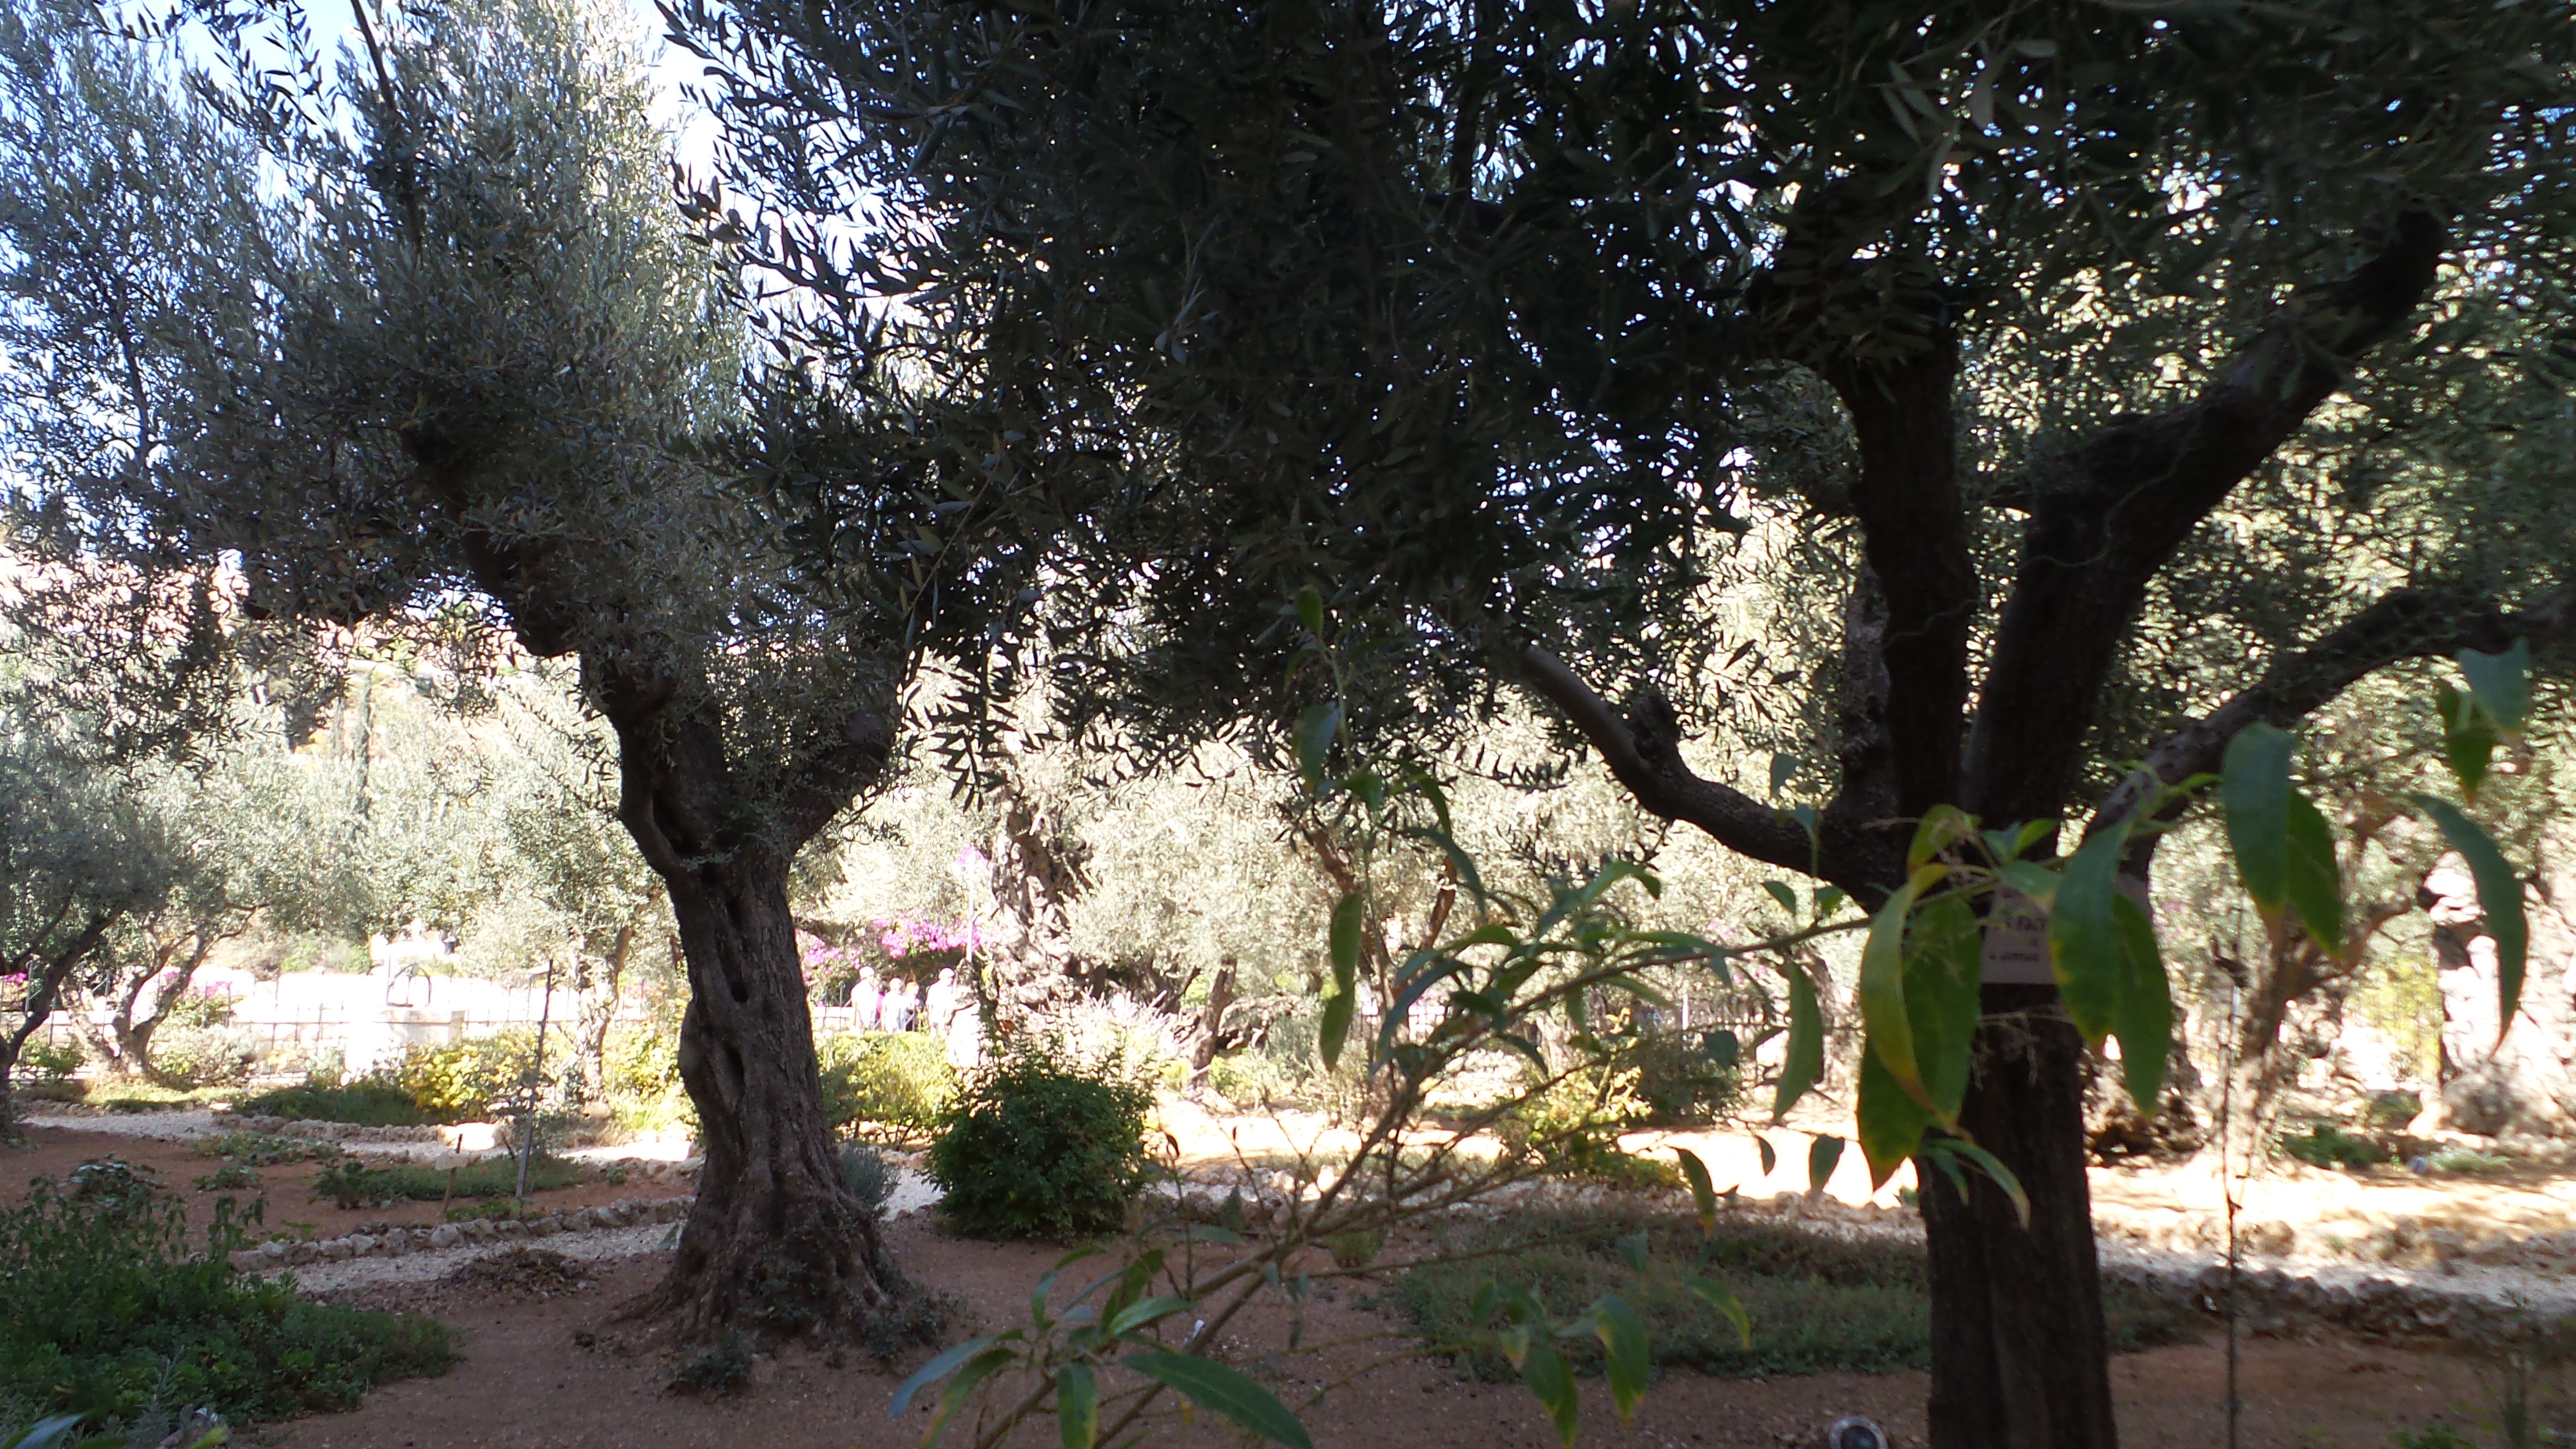 Olive Trees in the Garden of Gethsemane.